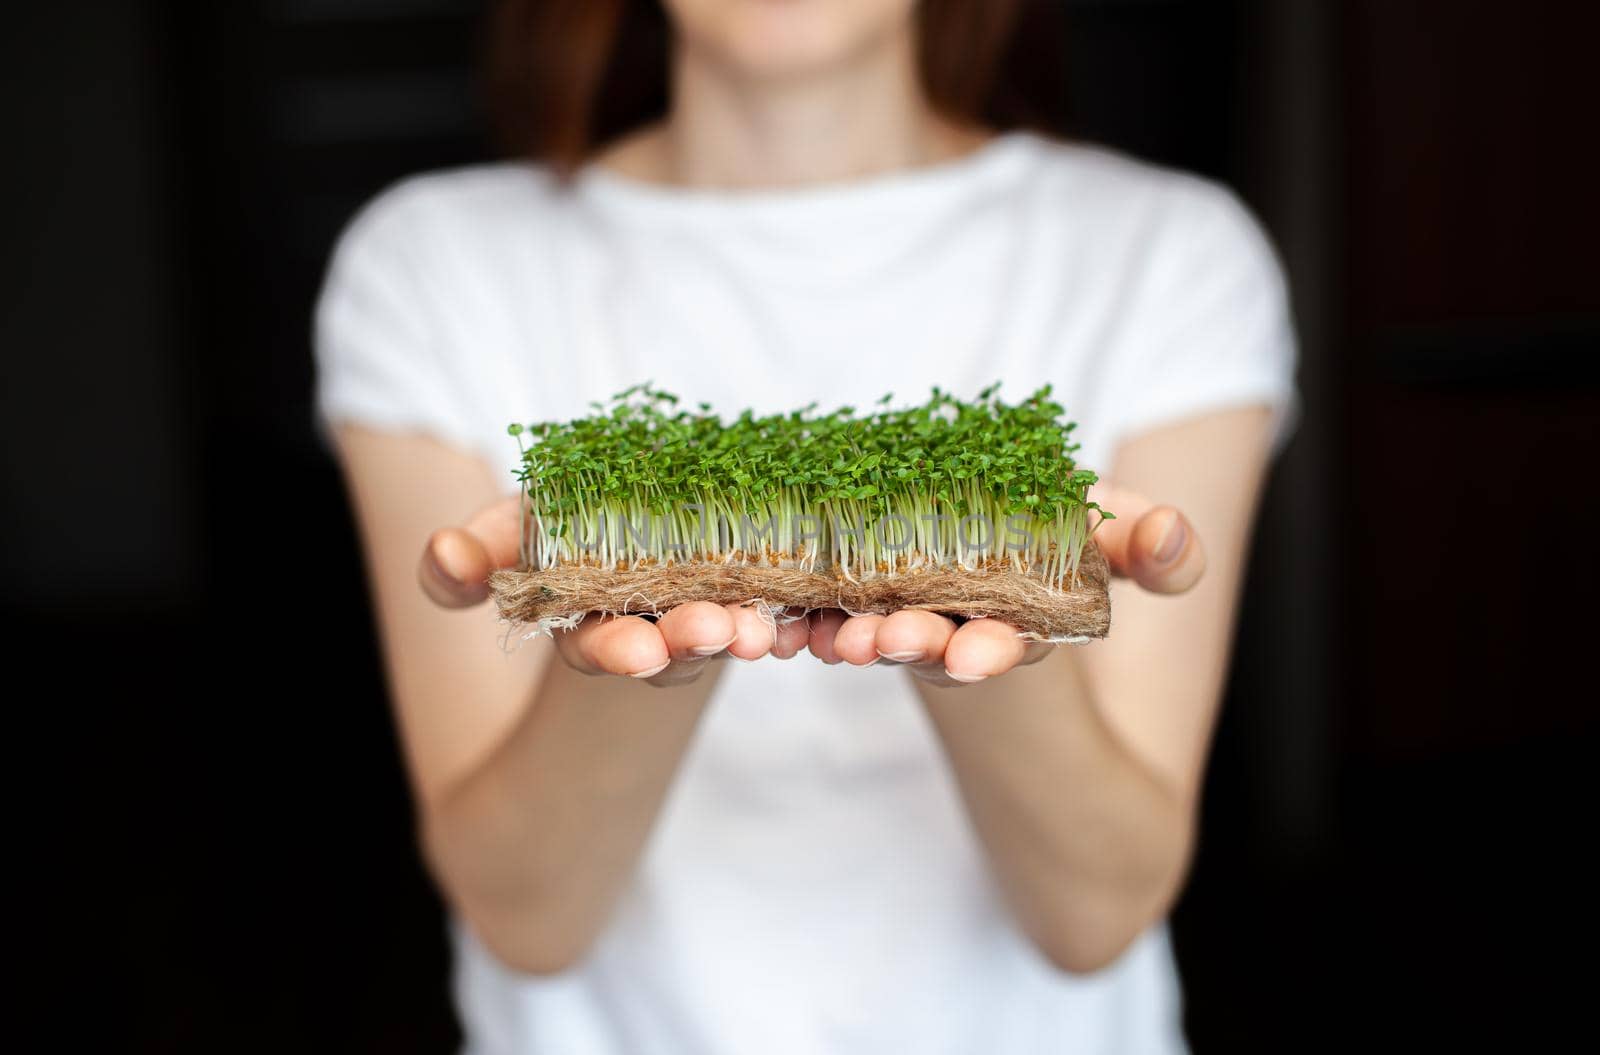 A woman holds micro greens grown at home in her hands. Healthy and healthy food. Vegetarian food. Micro-greens for salads and meals